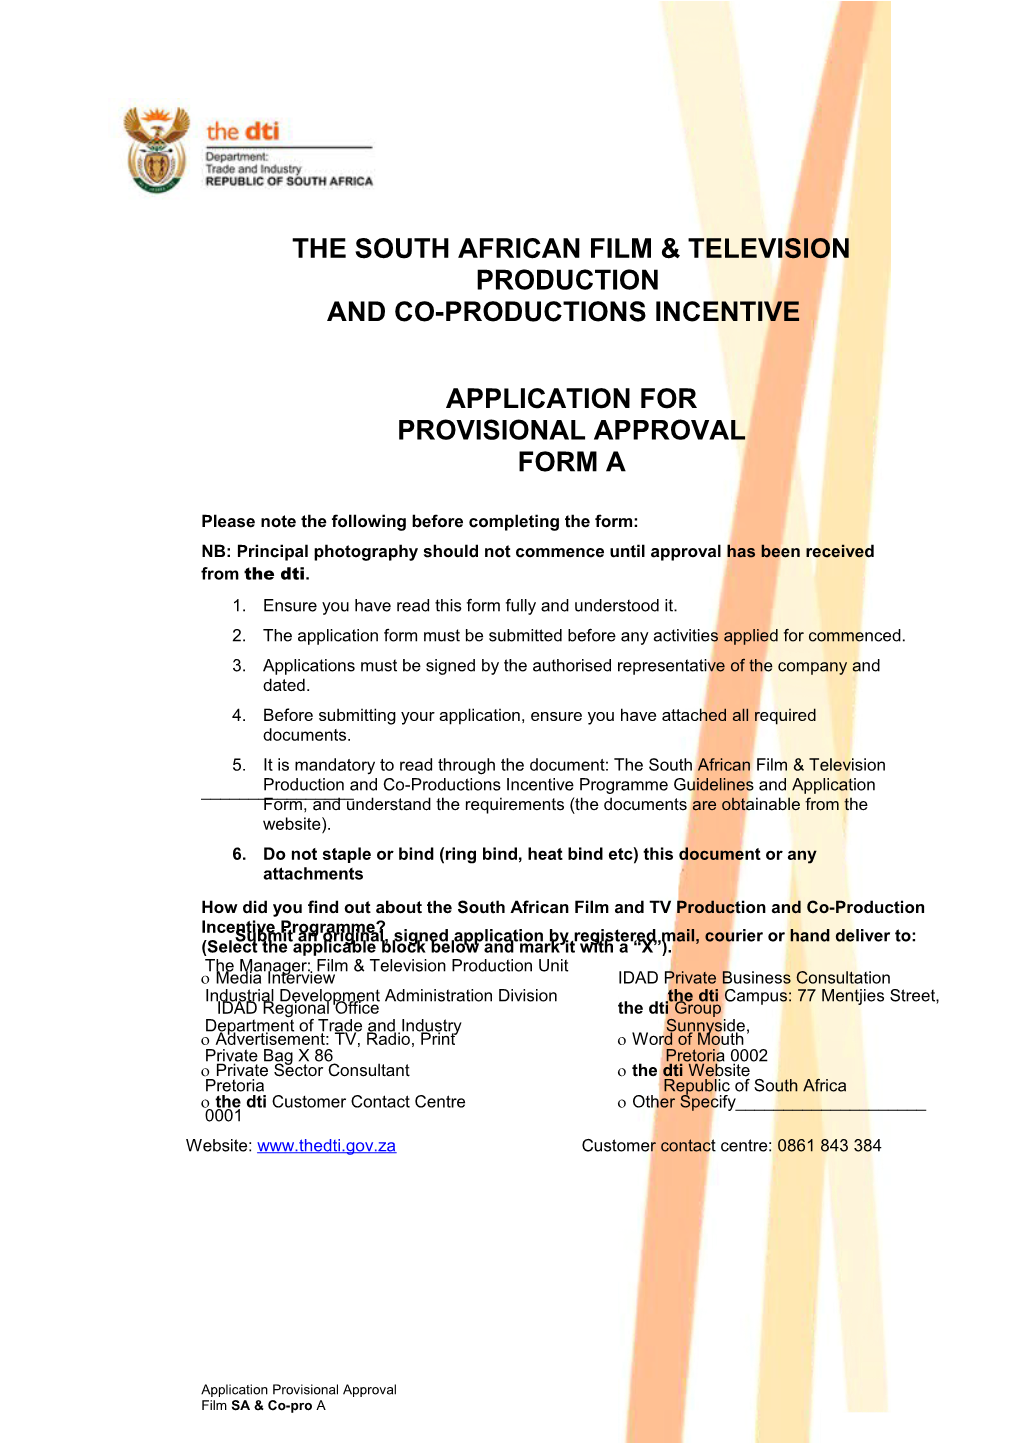 The South African Film & Television Production